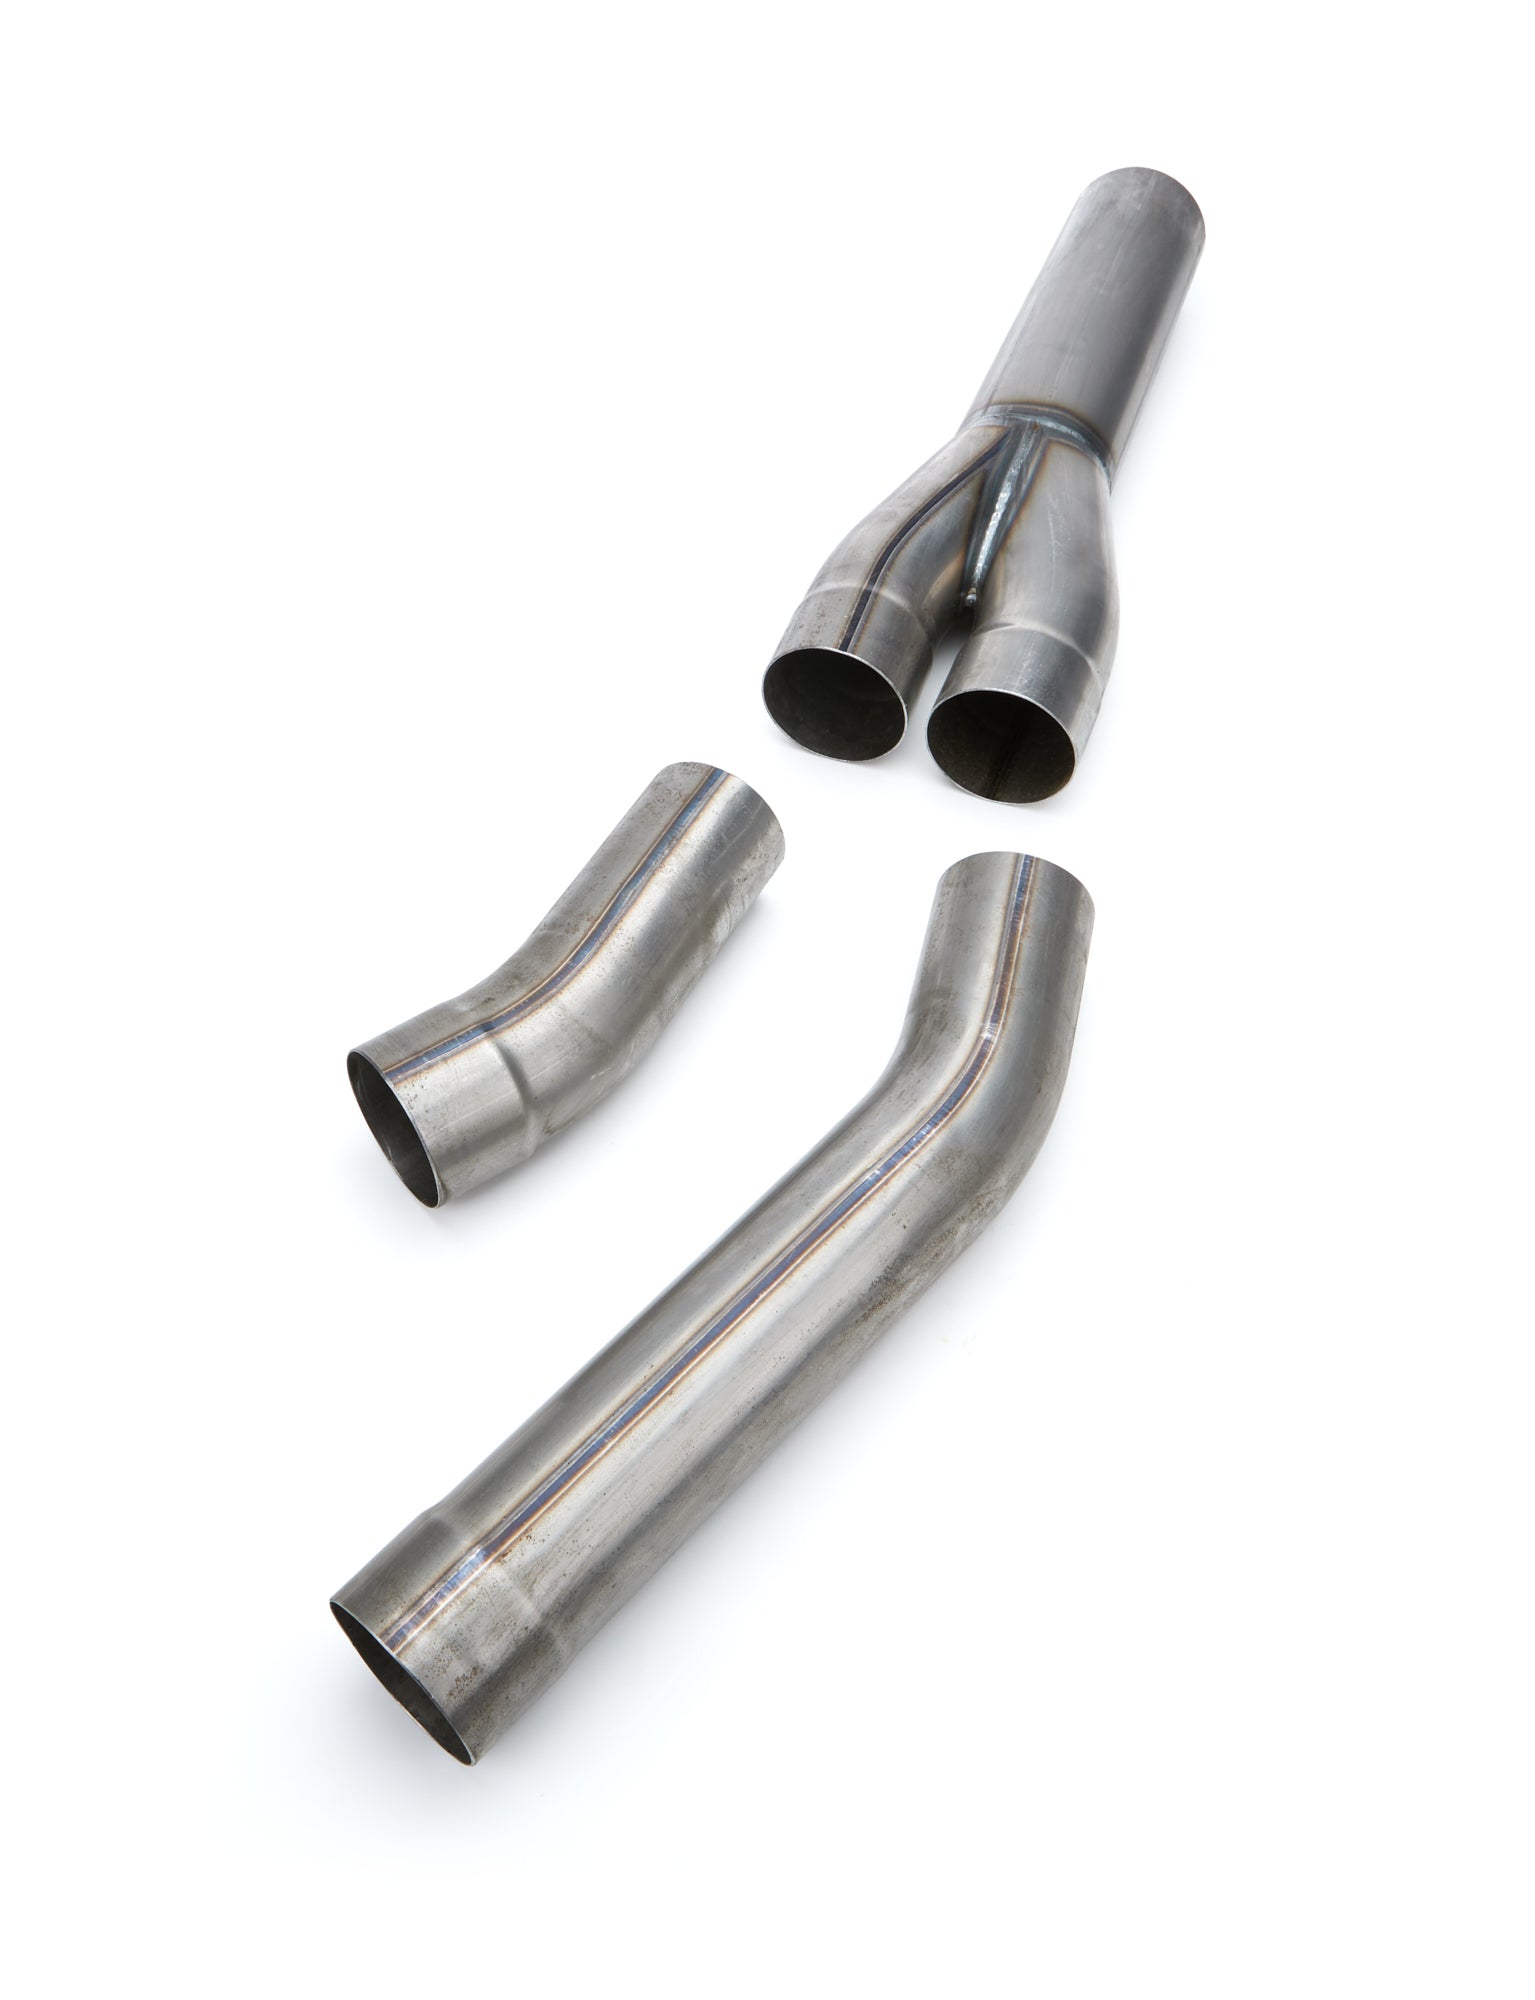 Beyea Custom Headers Cross Over Y-Pipe Kit w/ 2 Elbows 4 - 1 Exhaust Pipes, Systems and Components Exhaust Y-Pipes main image